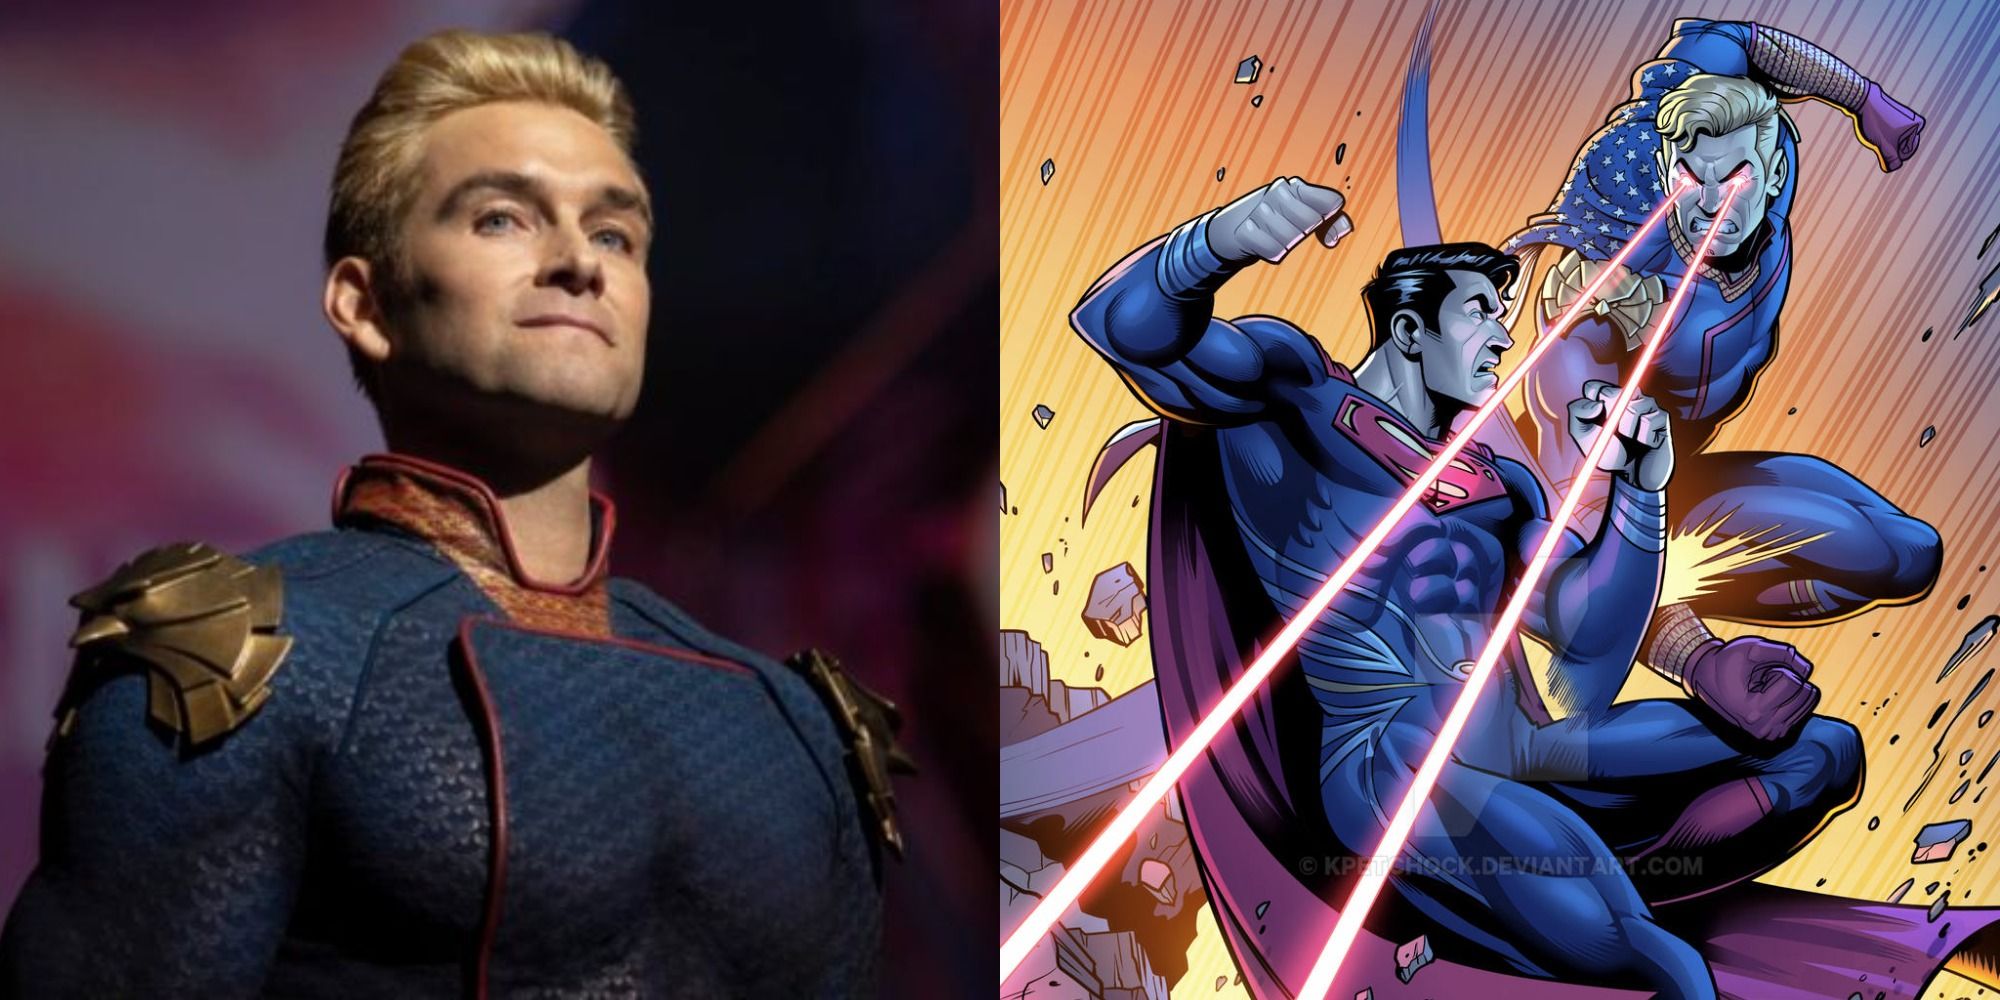 Antony Starr's Homelander gets a prequel in The Boys animated spin-off